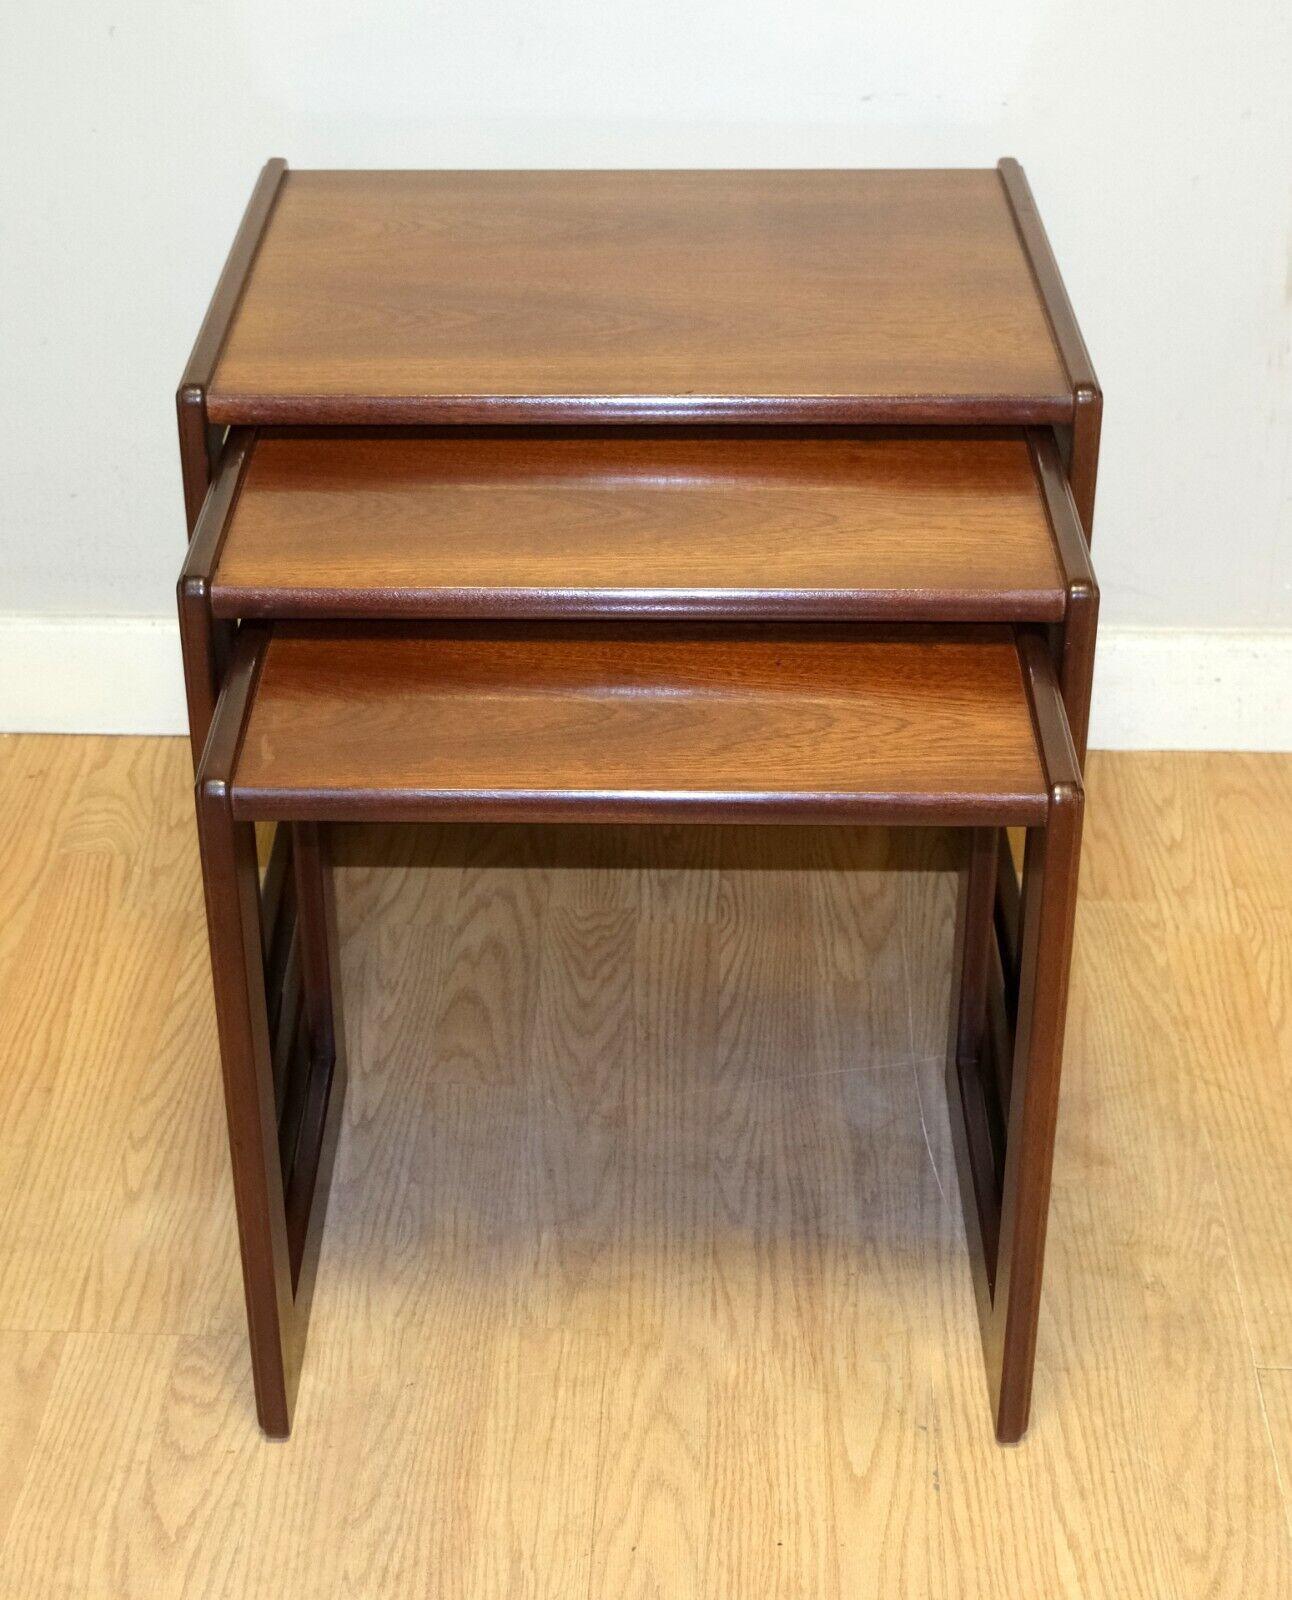 We are delighted to offer for sale this stunning Art Deco, G Plan, teak set nest of three tables on square supports.

This charming and beautiful set offers you elegance and quality. The joints on the legs show the tight minimalist design known as